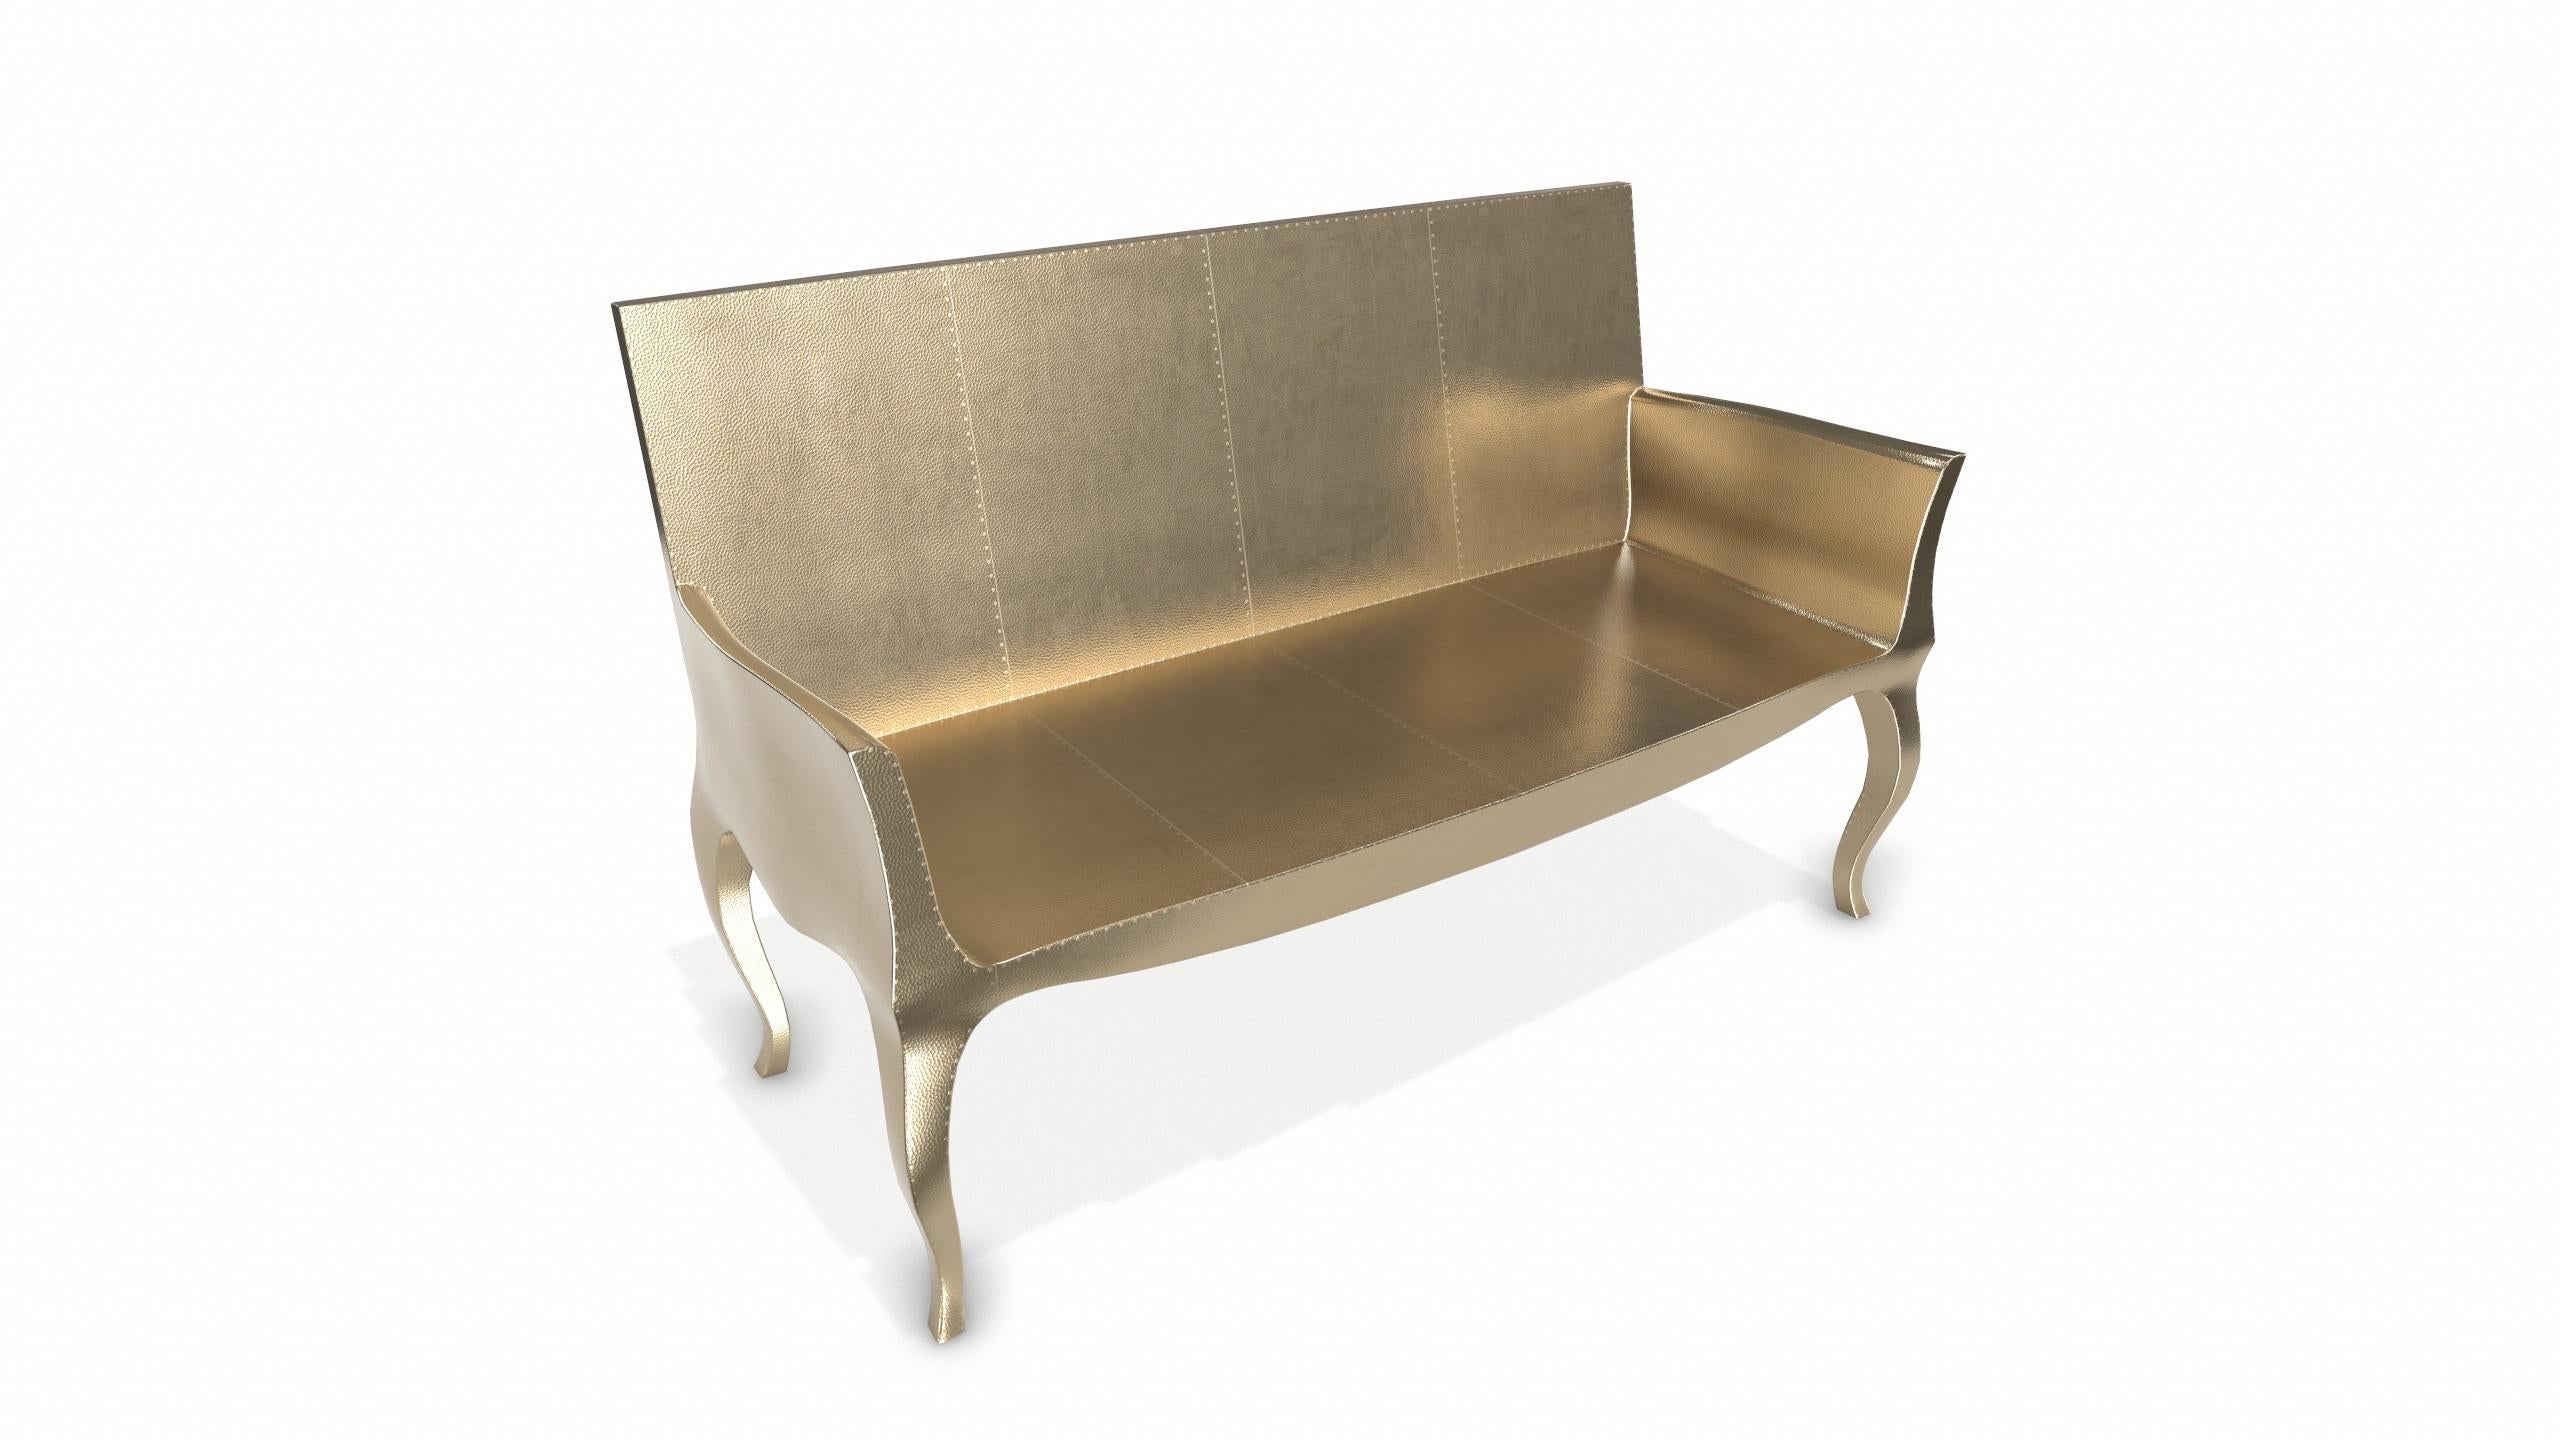 Louise Settee Art Deco Benches in Mid. Hammered Brass by Paul Mathieu For Sale 2